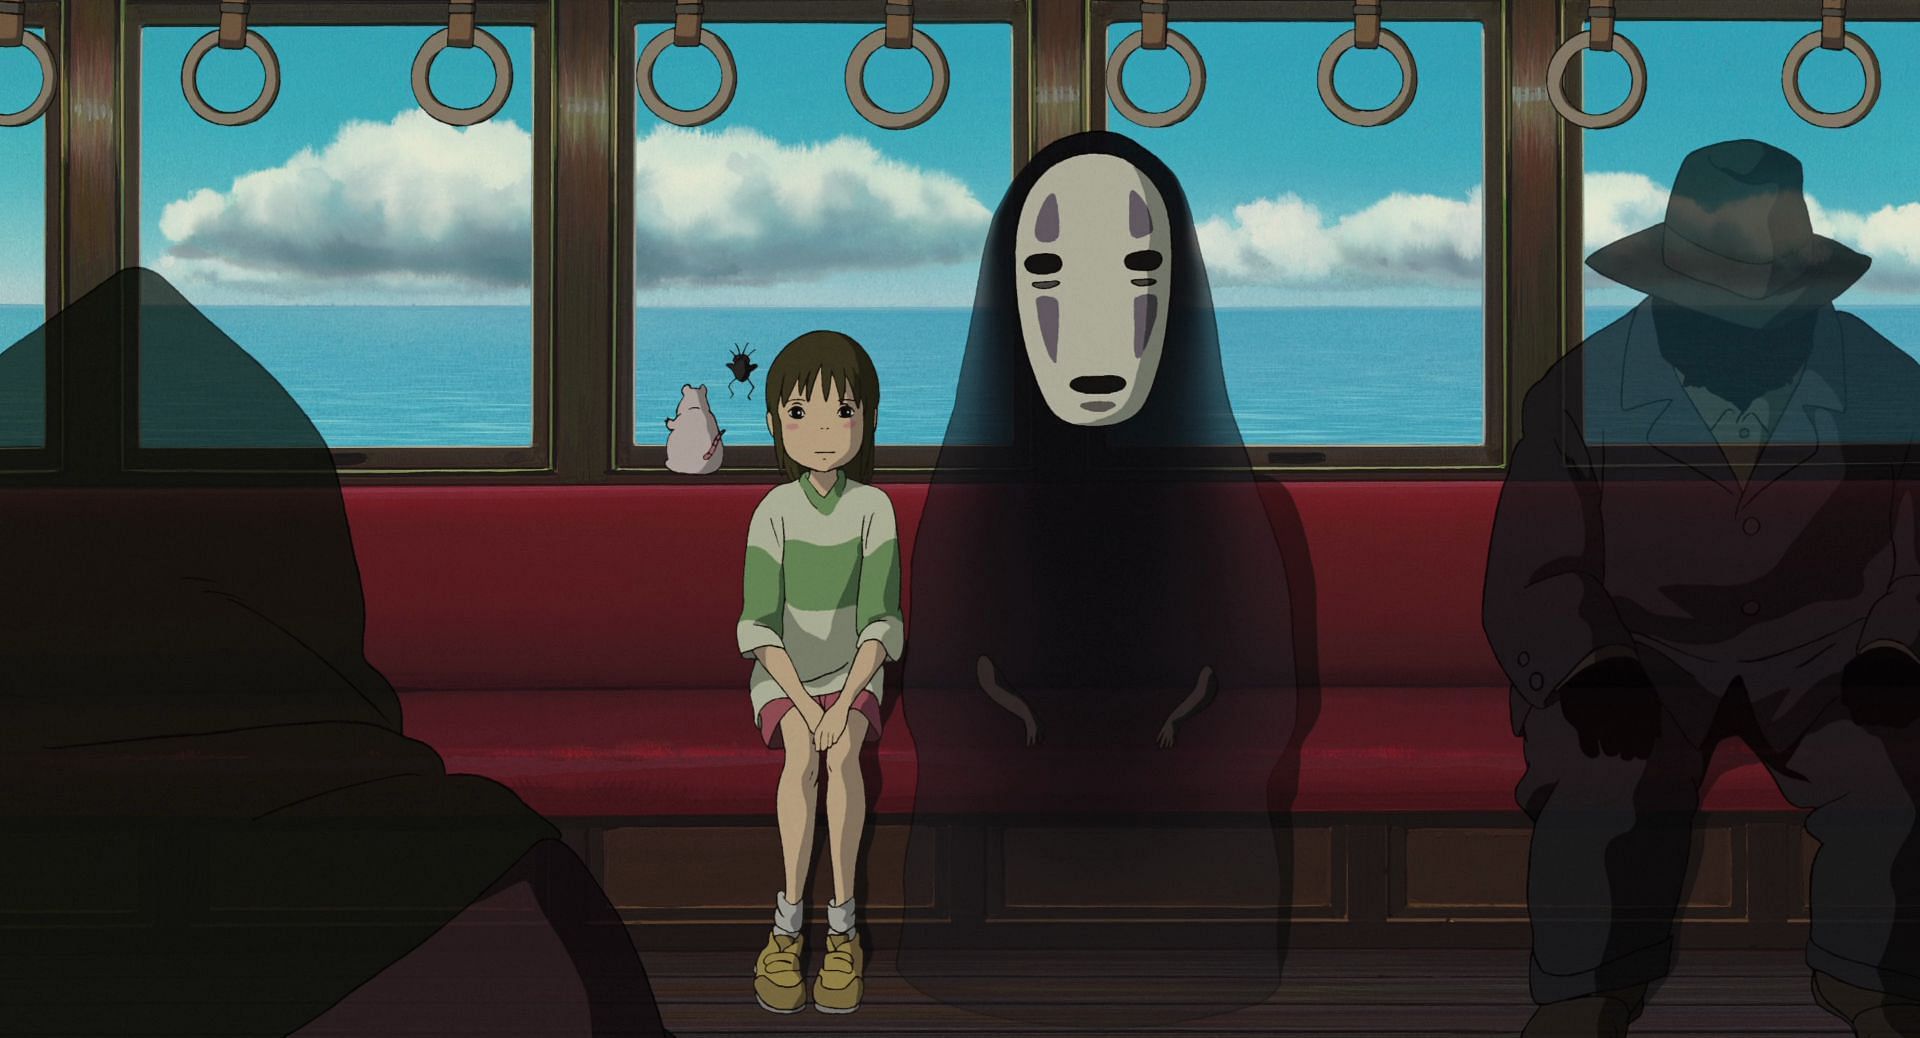 The Train scene from Spirited Away, featuring Chihiro and No-Face (Image via Studio Ghibli)